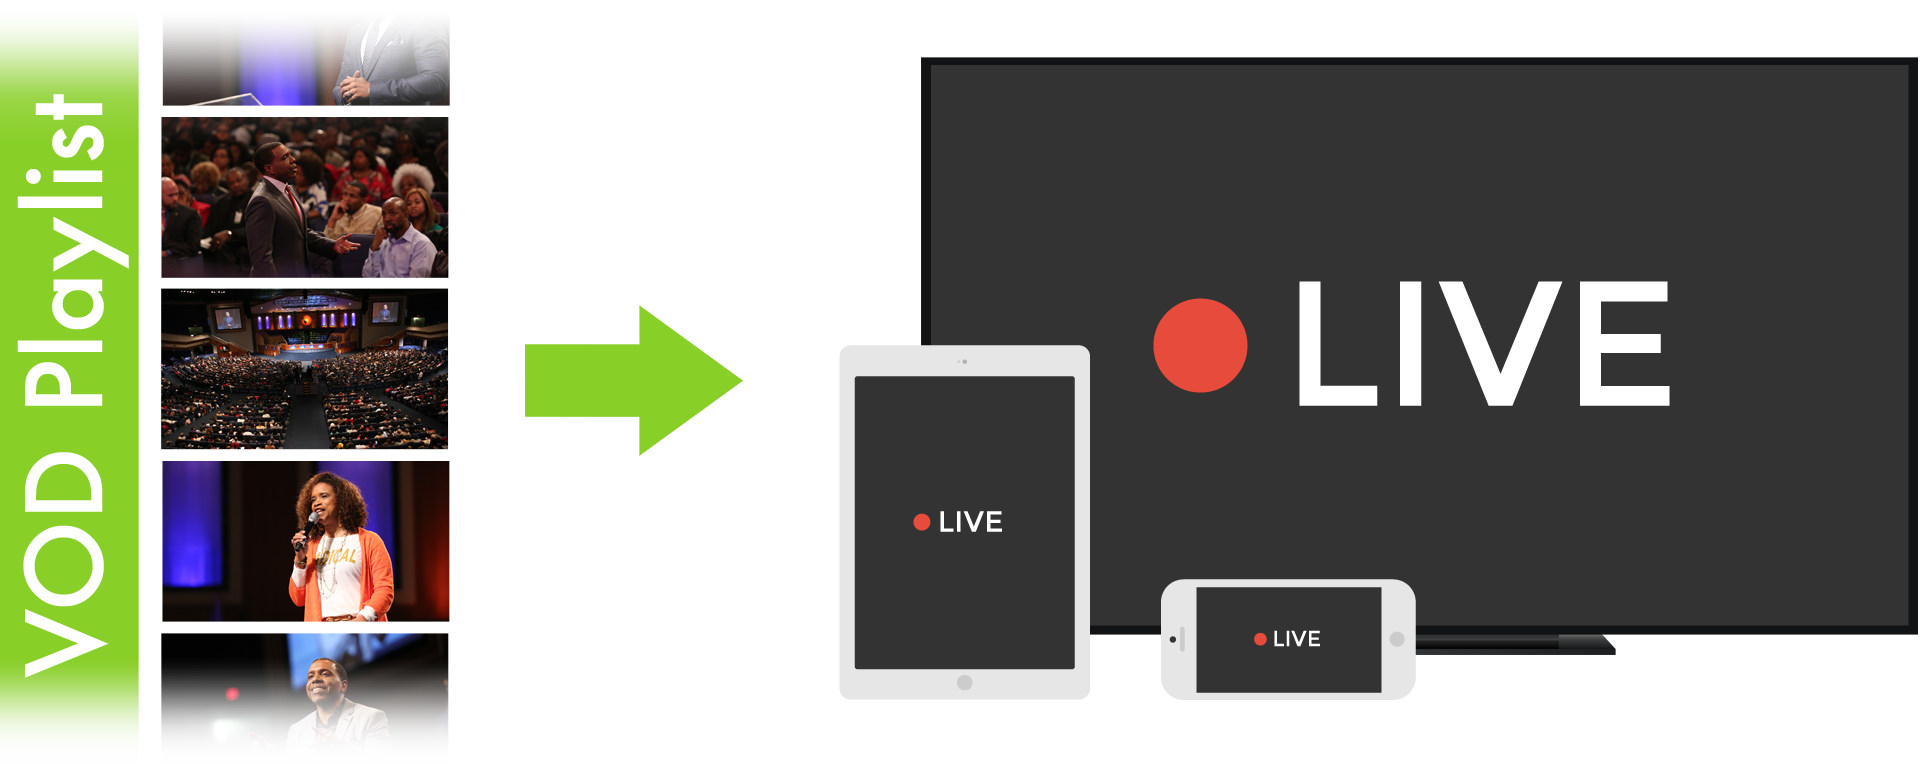 VOD-to-LIVE Continuous Loop Lightcast